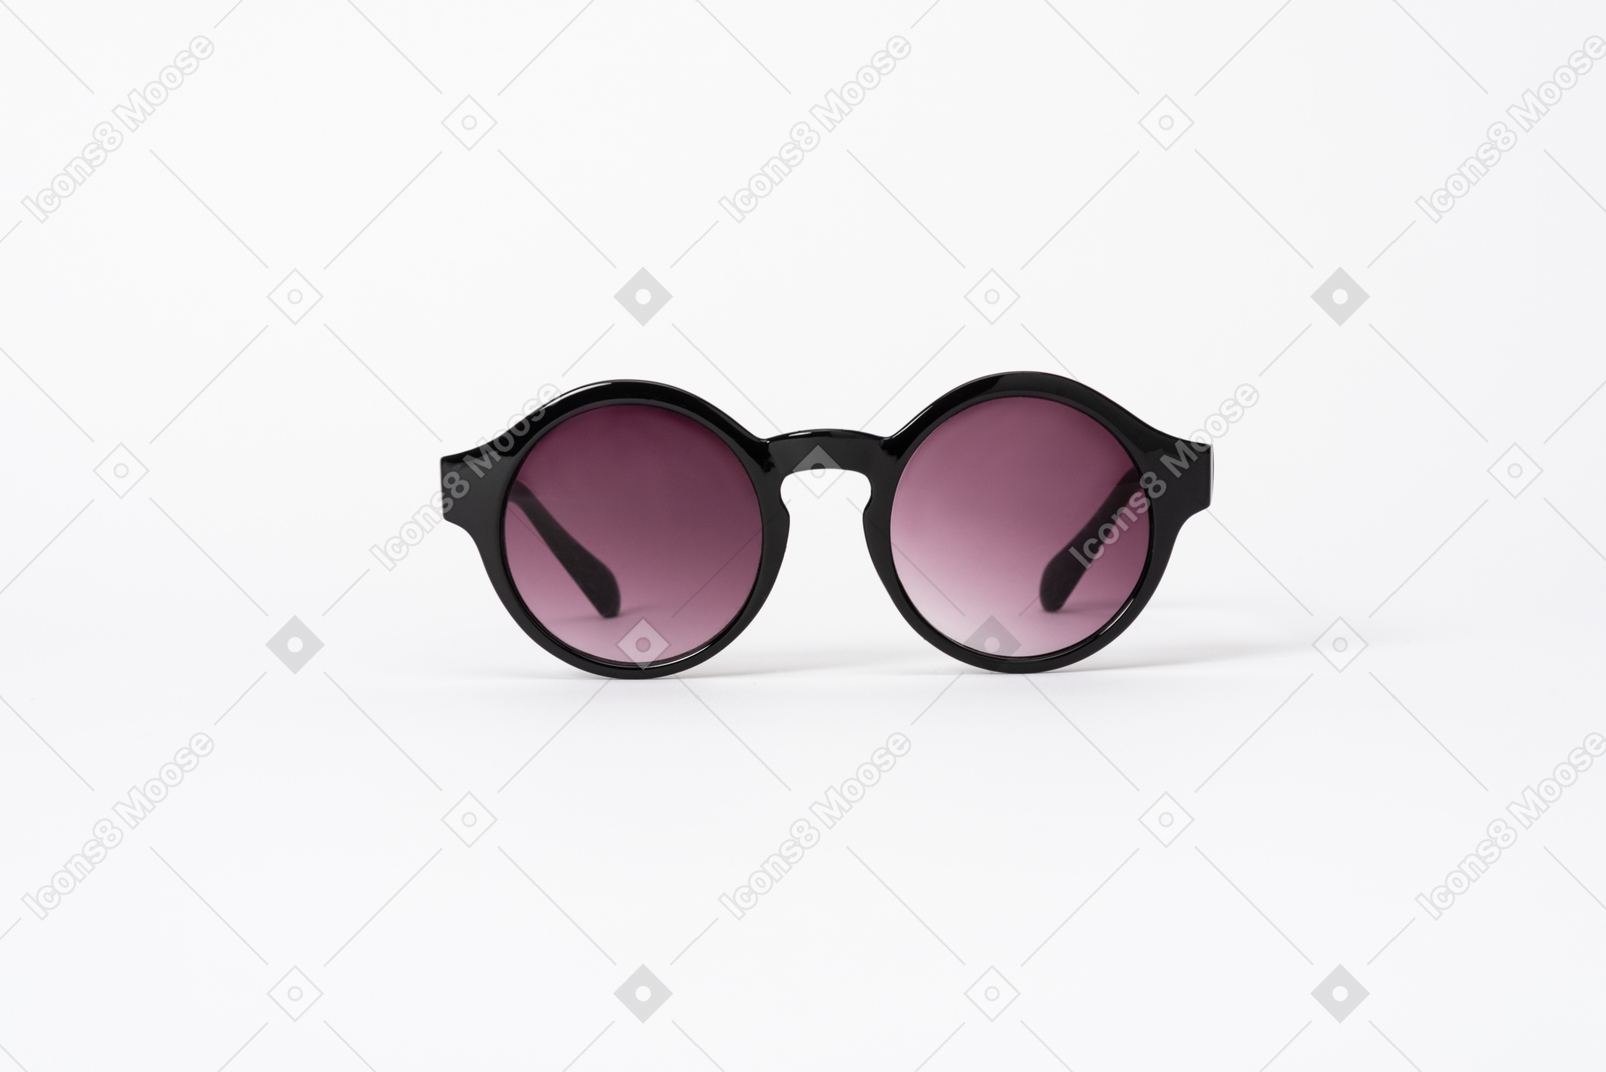 A pair of round shaped sunglasses